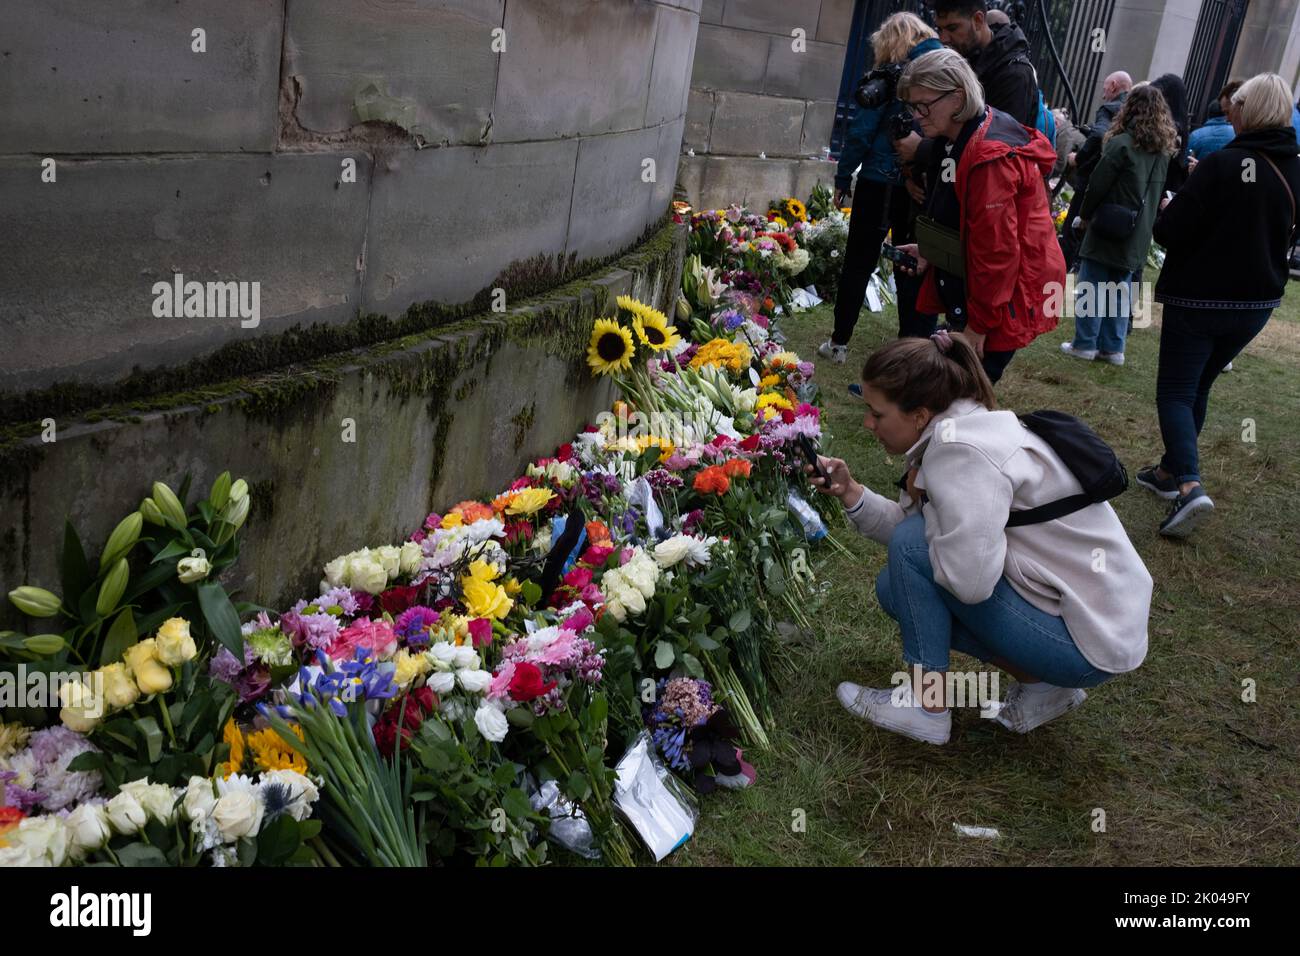 Edinburgh, Scotland, 9 September 2022. Laying flowers at Palace of Holyroodhouse as a mark of respect to Her Majesty Queen Elizabeth II, who has died aged 96, in Edinburgh, Scotland, 9 September 2022. Photo credit: Jeremy Sutton-Hibbert/ Alamy Live news. Stock Photo